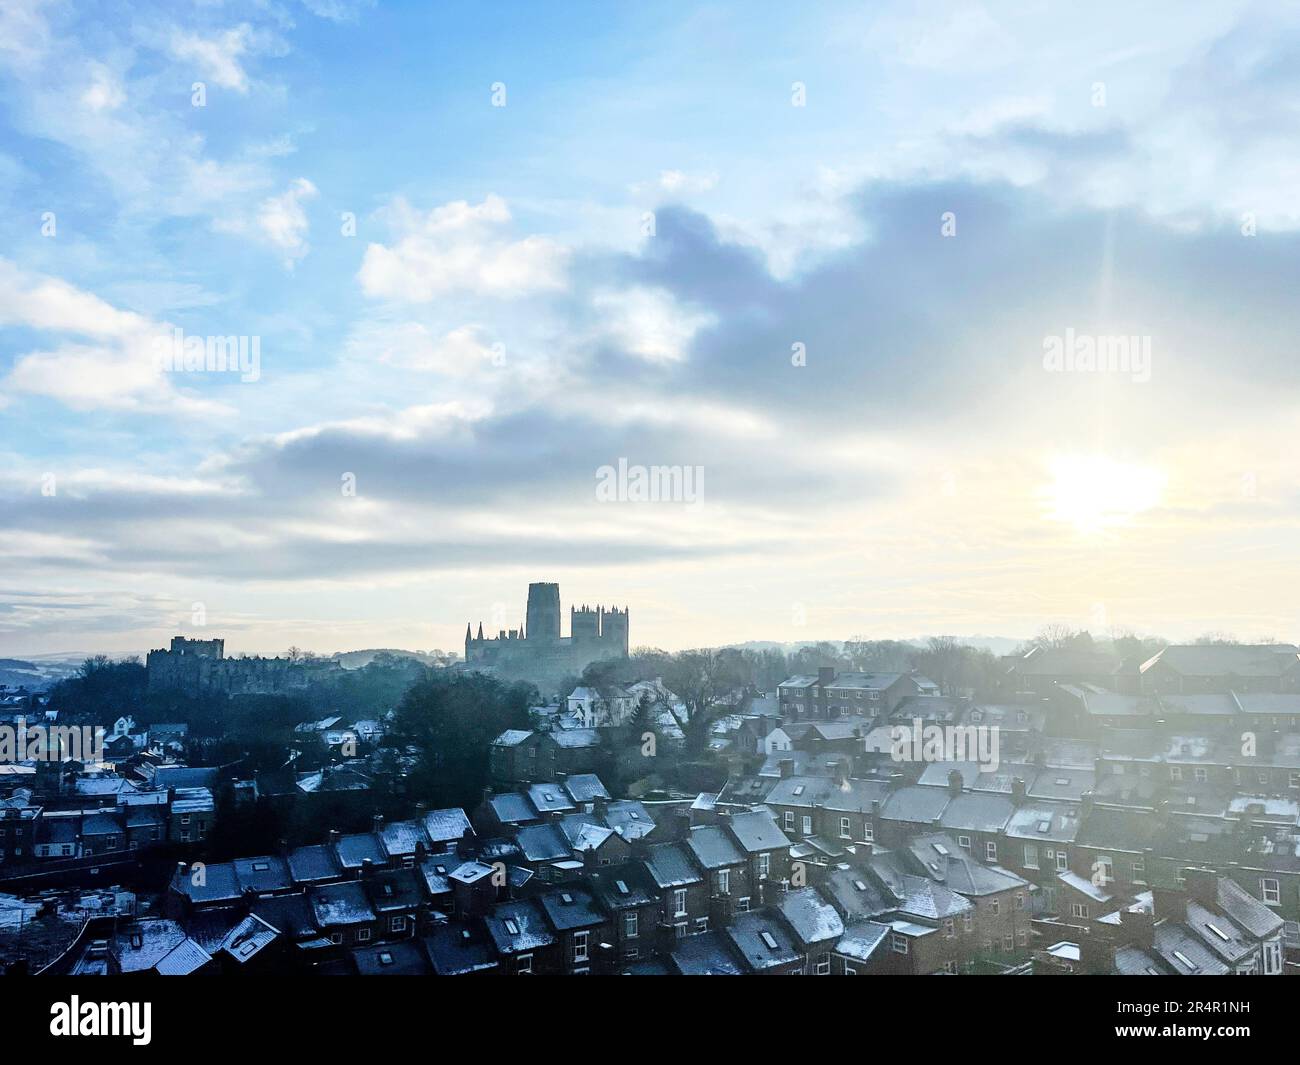 Durham and Durham Cathedral seen from the main London to Edinburgh rail line. Stock Photo